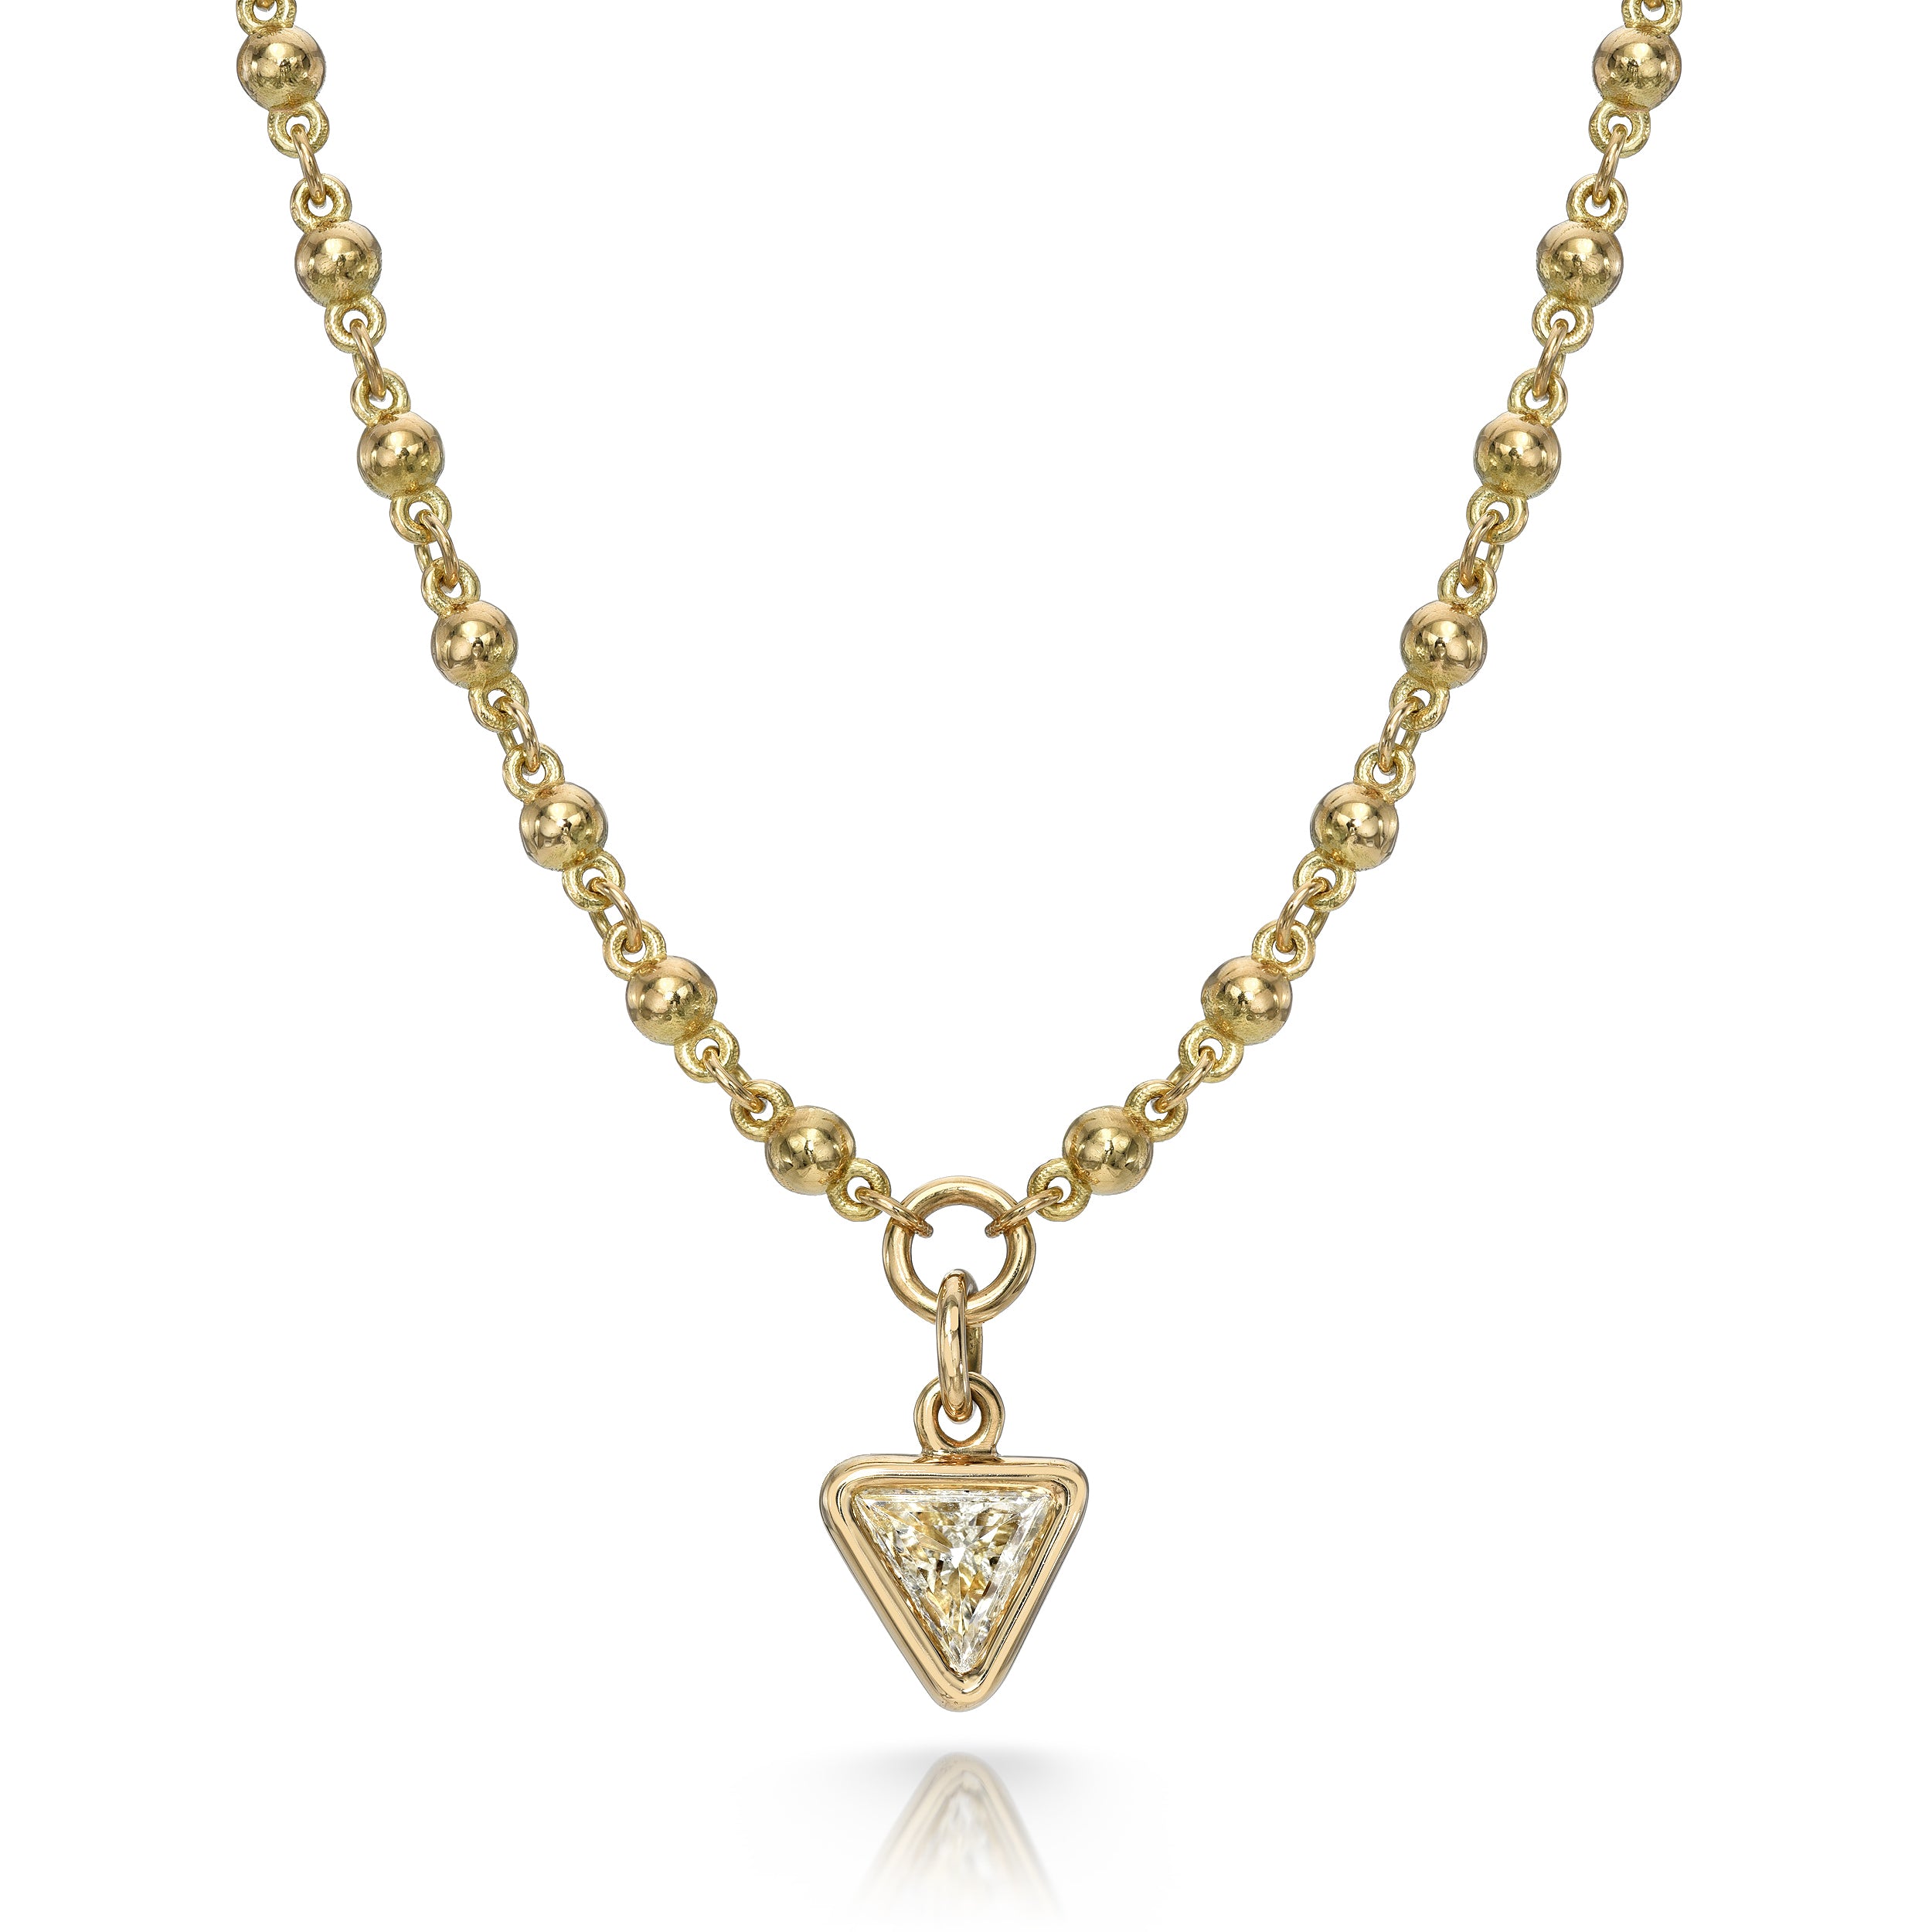 SINGLE STONE VEDA featuring 1.05ct H/SI1 trillion cut diamond bezel set on a handcrafted 18K yellow gold pendant necklace. Necklace measures 17".